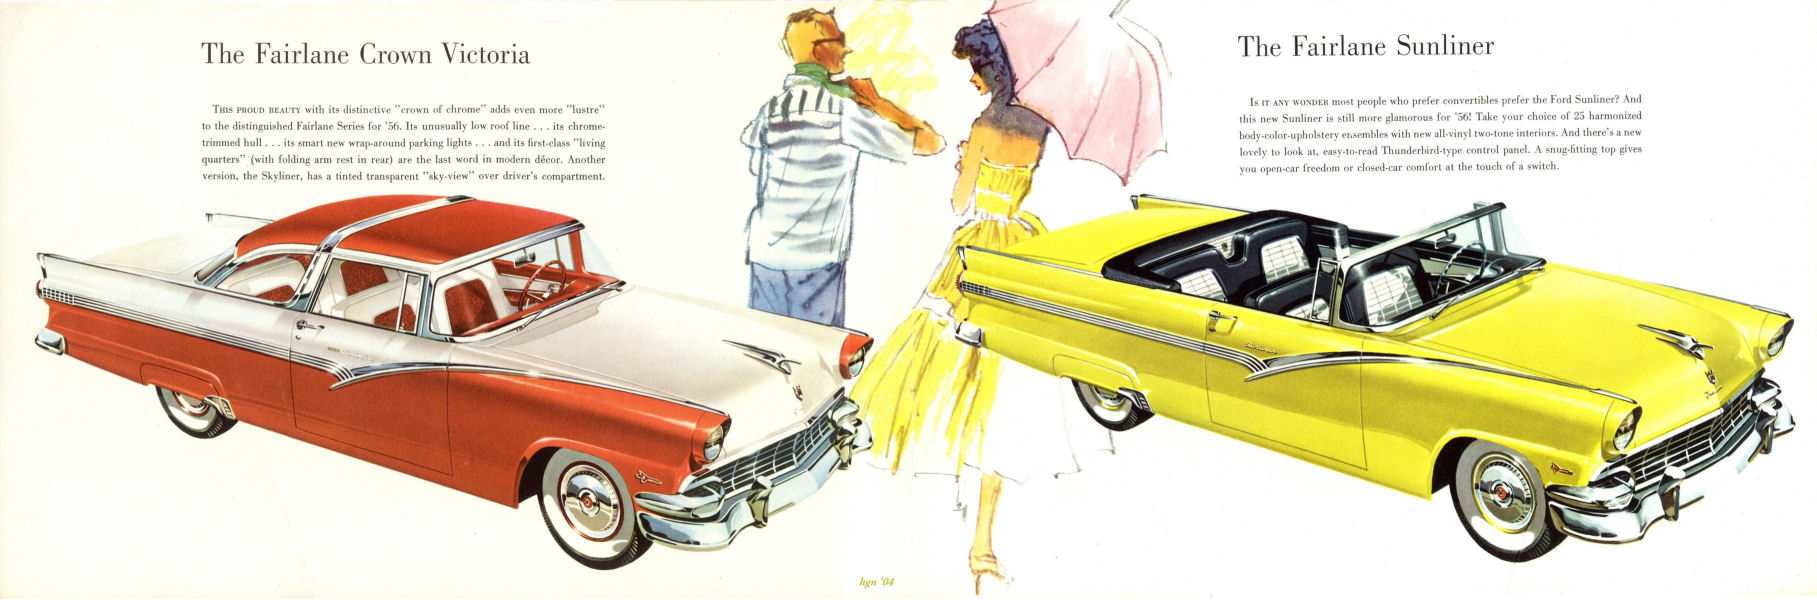 1956 Ford Fairlane Brochure Page 2